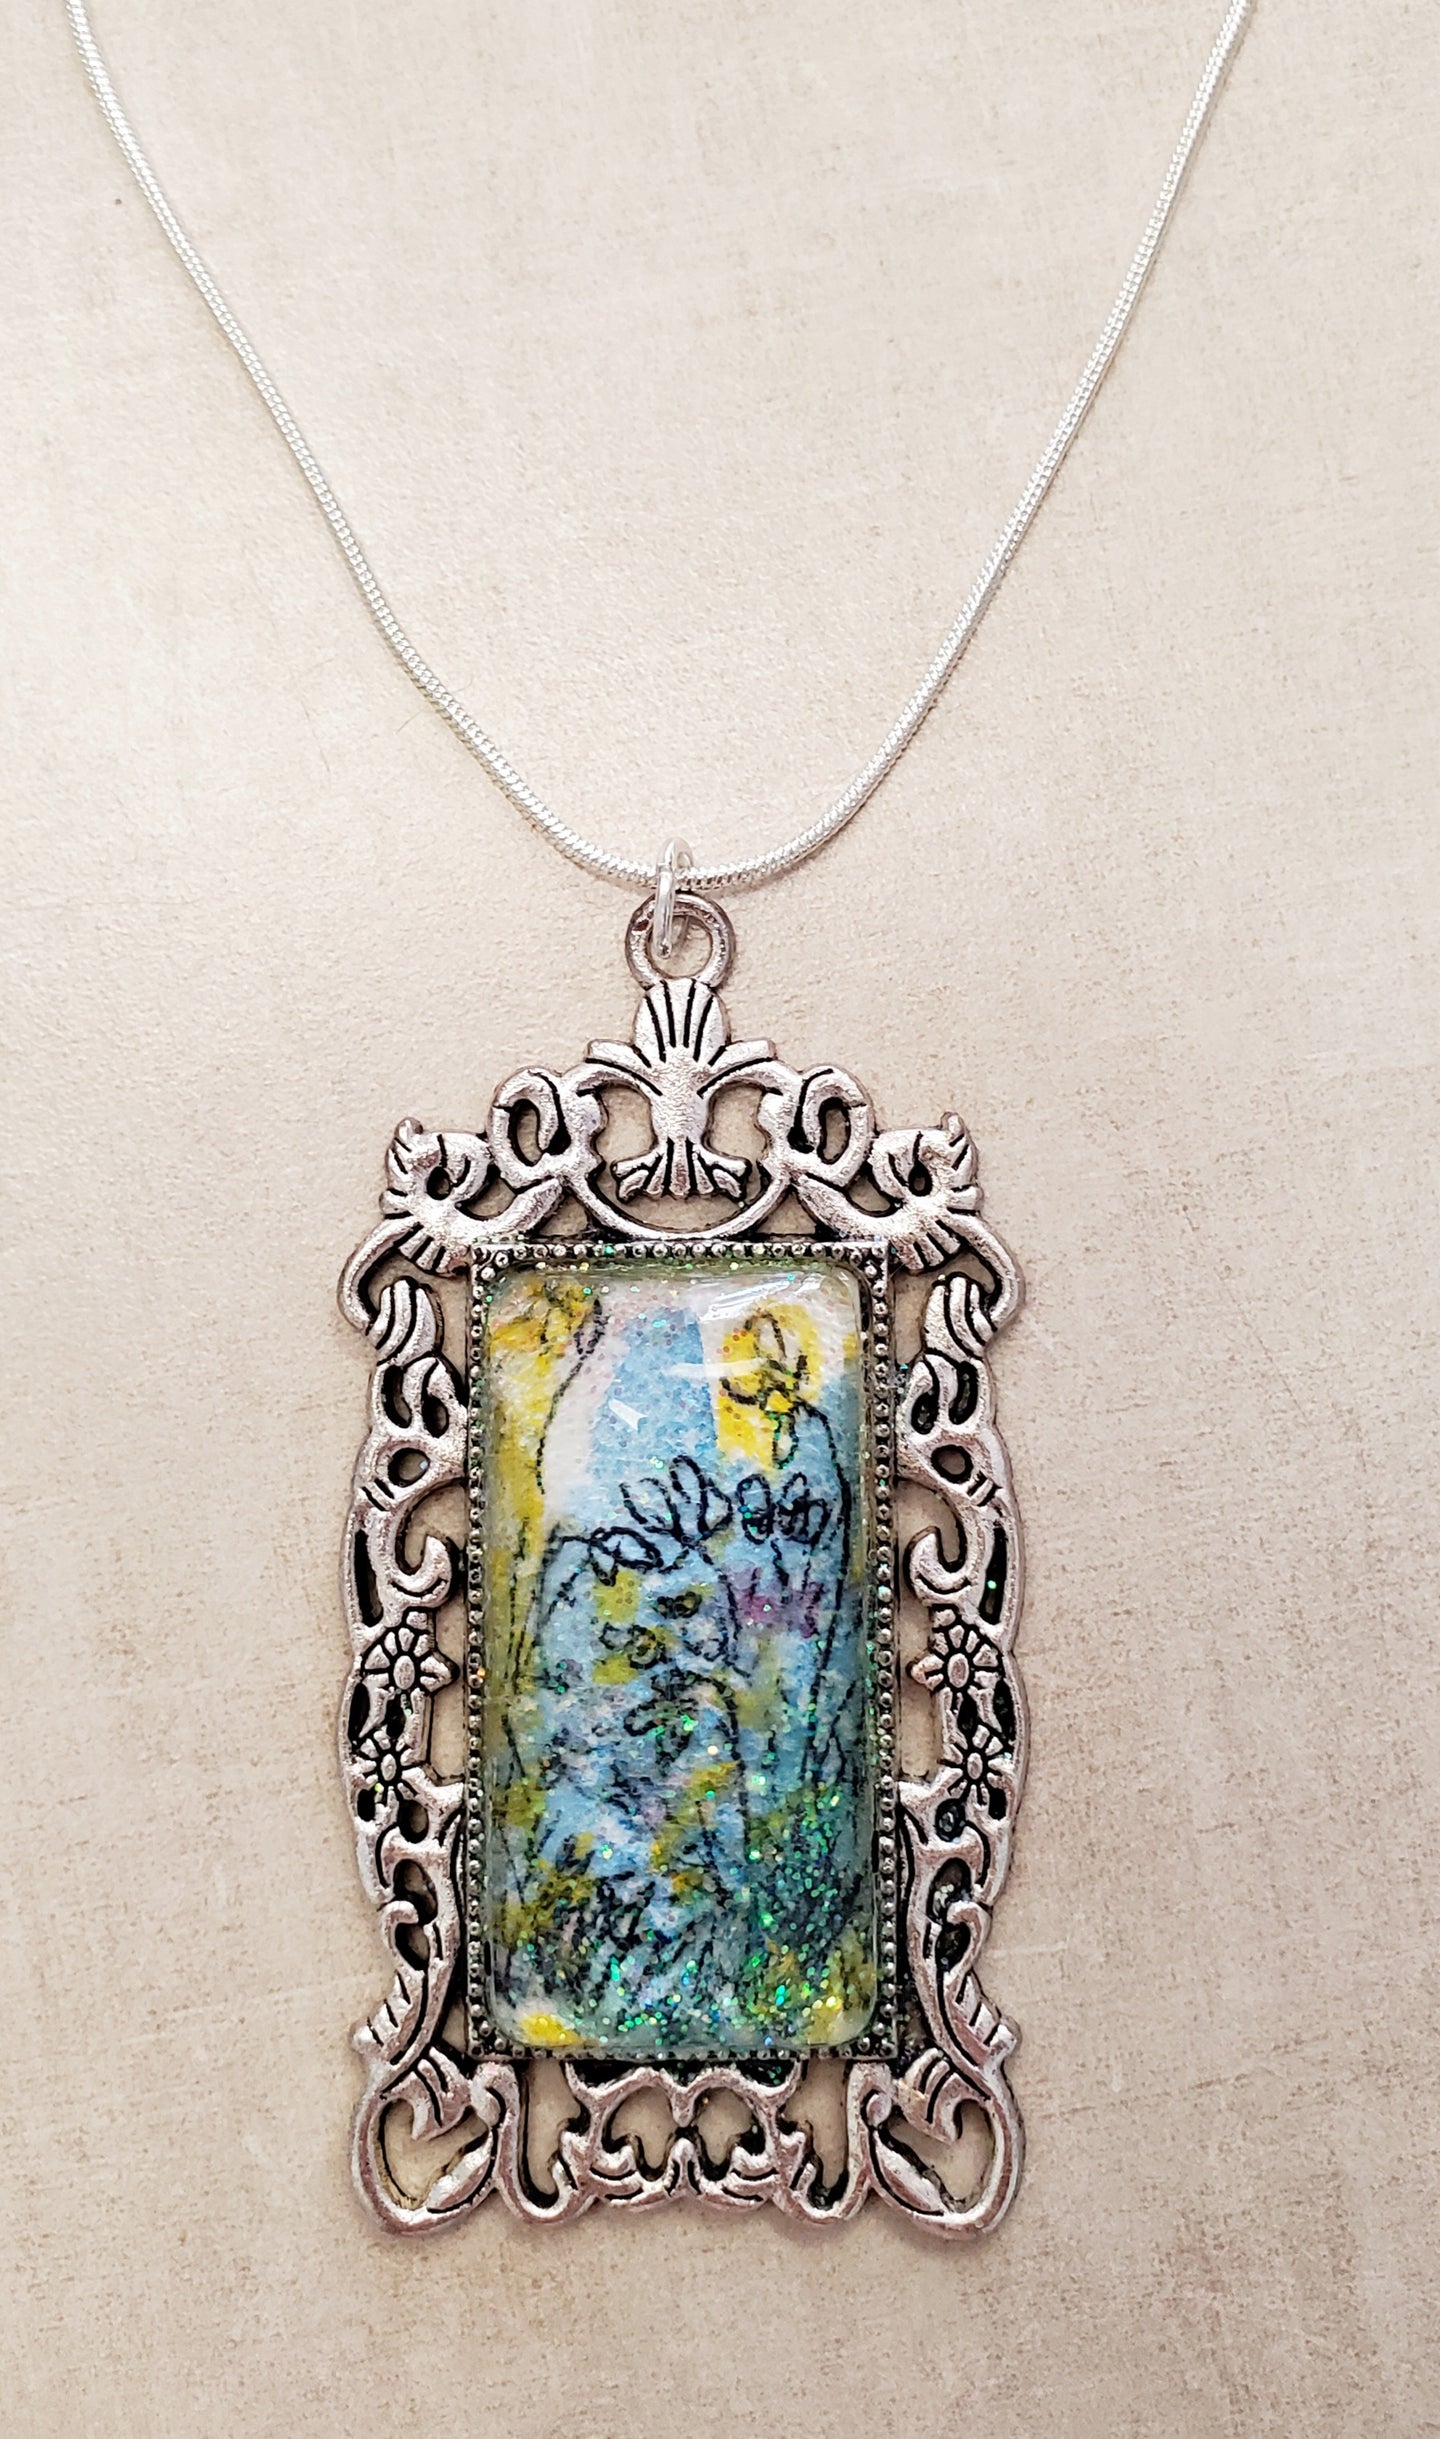 Hand-Painted Blue and Yellow Floral Necklace